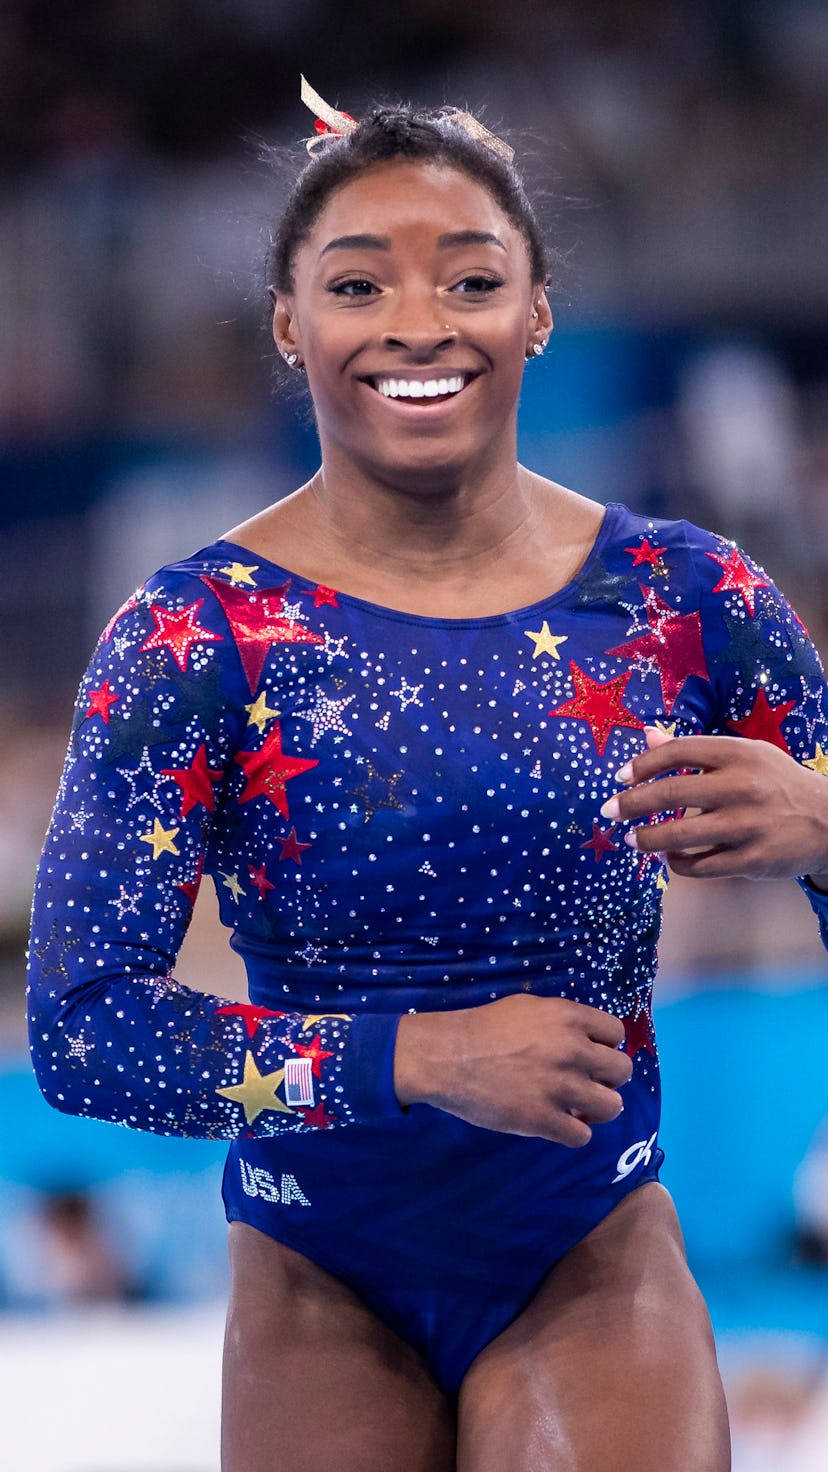 All 8 of the Team USA Olympics Gymnastics uniforms in 2021 were made by GK Elite. Find the meaning b...